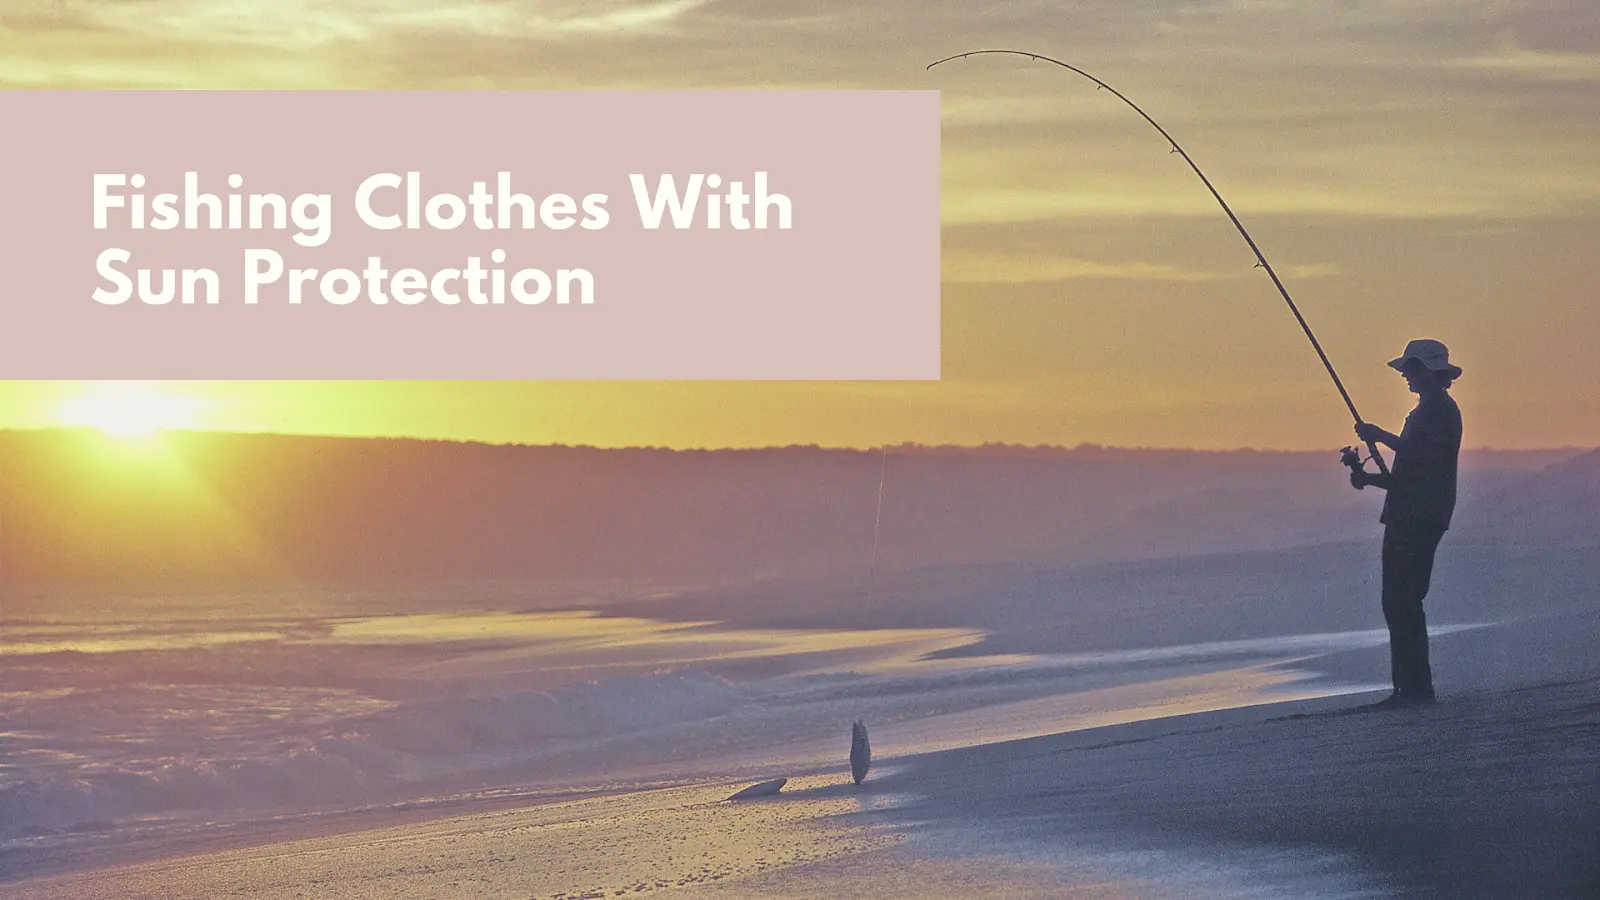 Fishing Clothes With Sun Protection